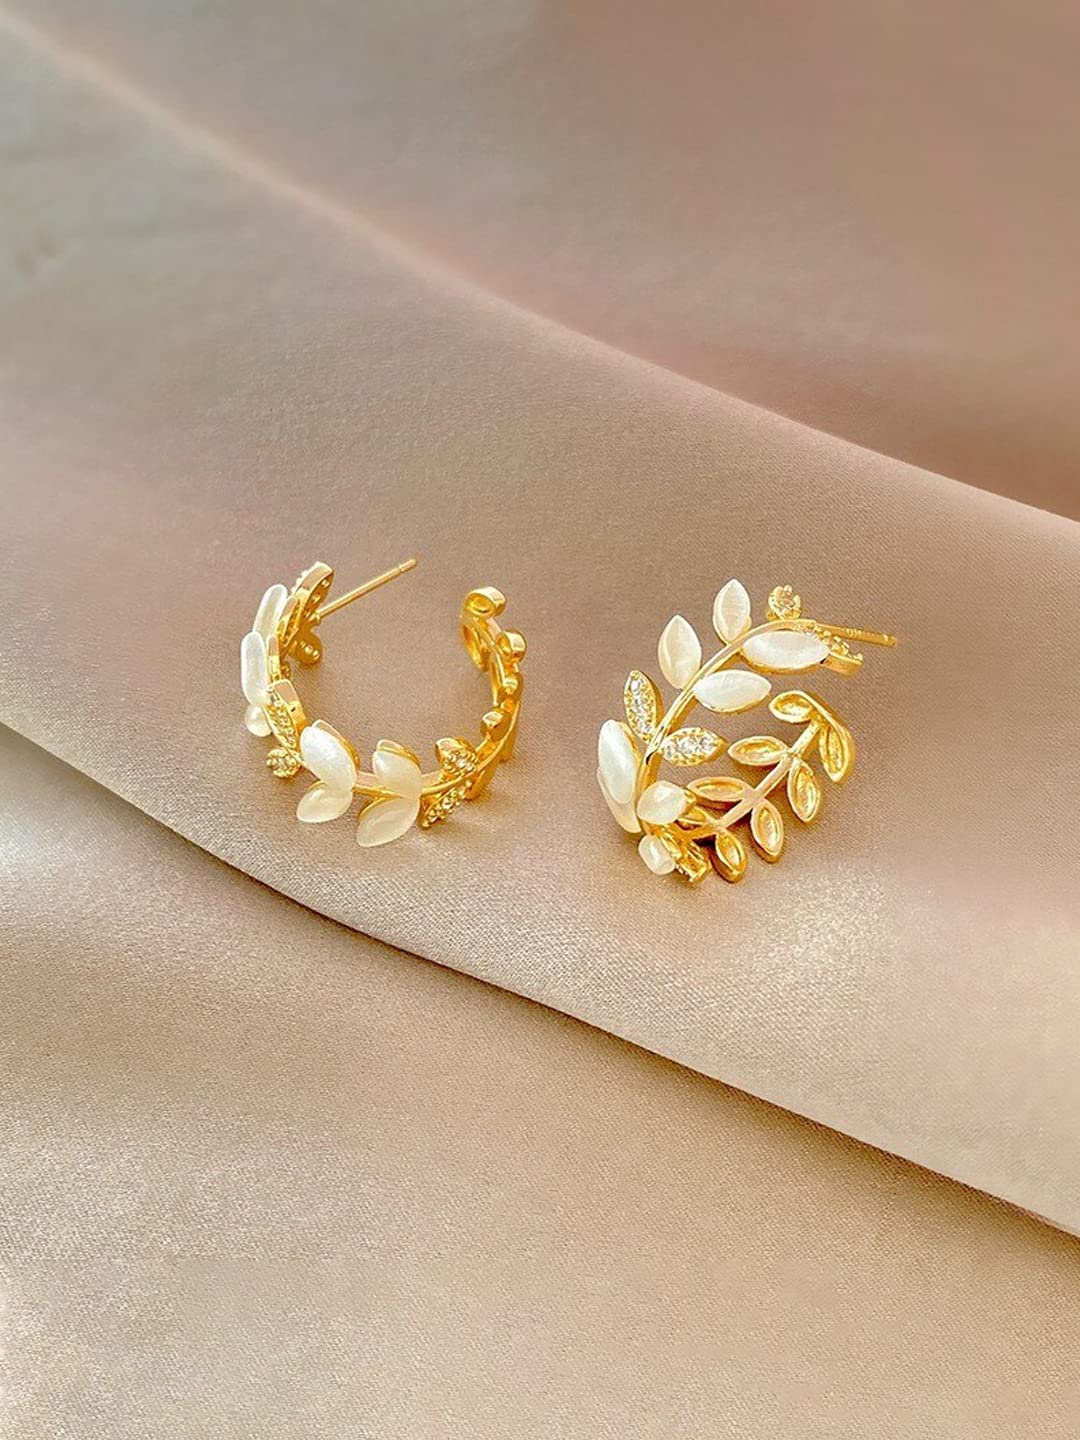 Sold at Auction: 24K YELLOW GOLD LADIES GOLD NUGGET EARRINGS